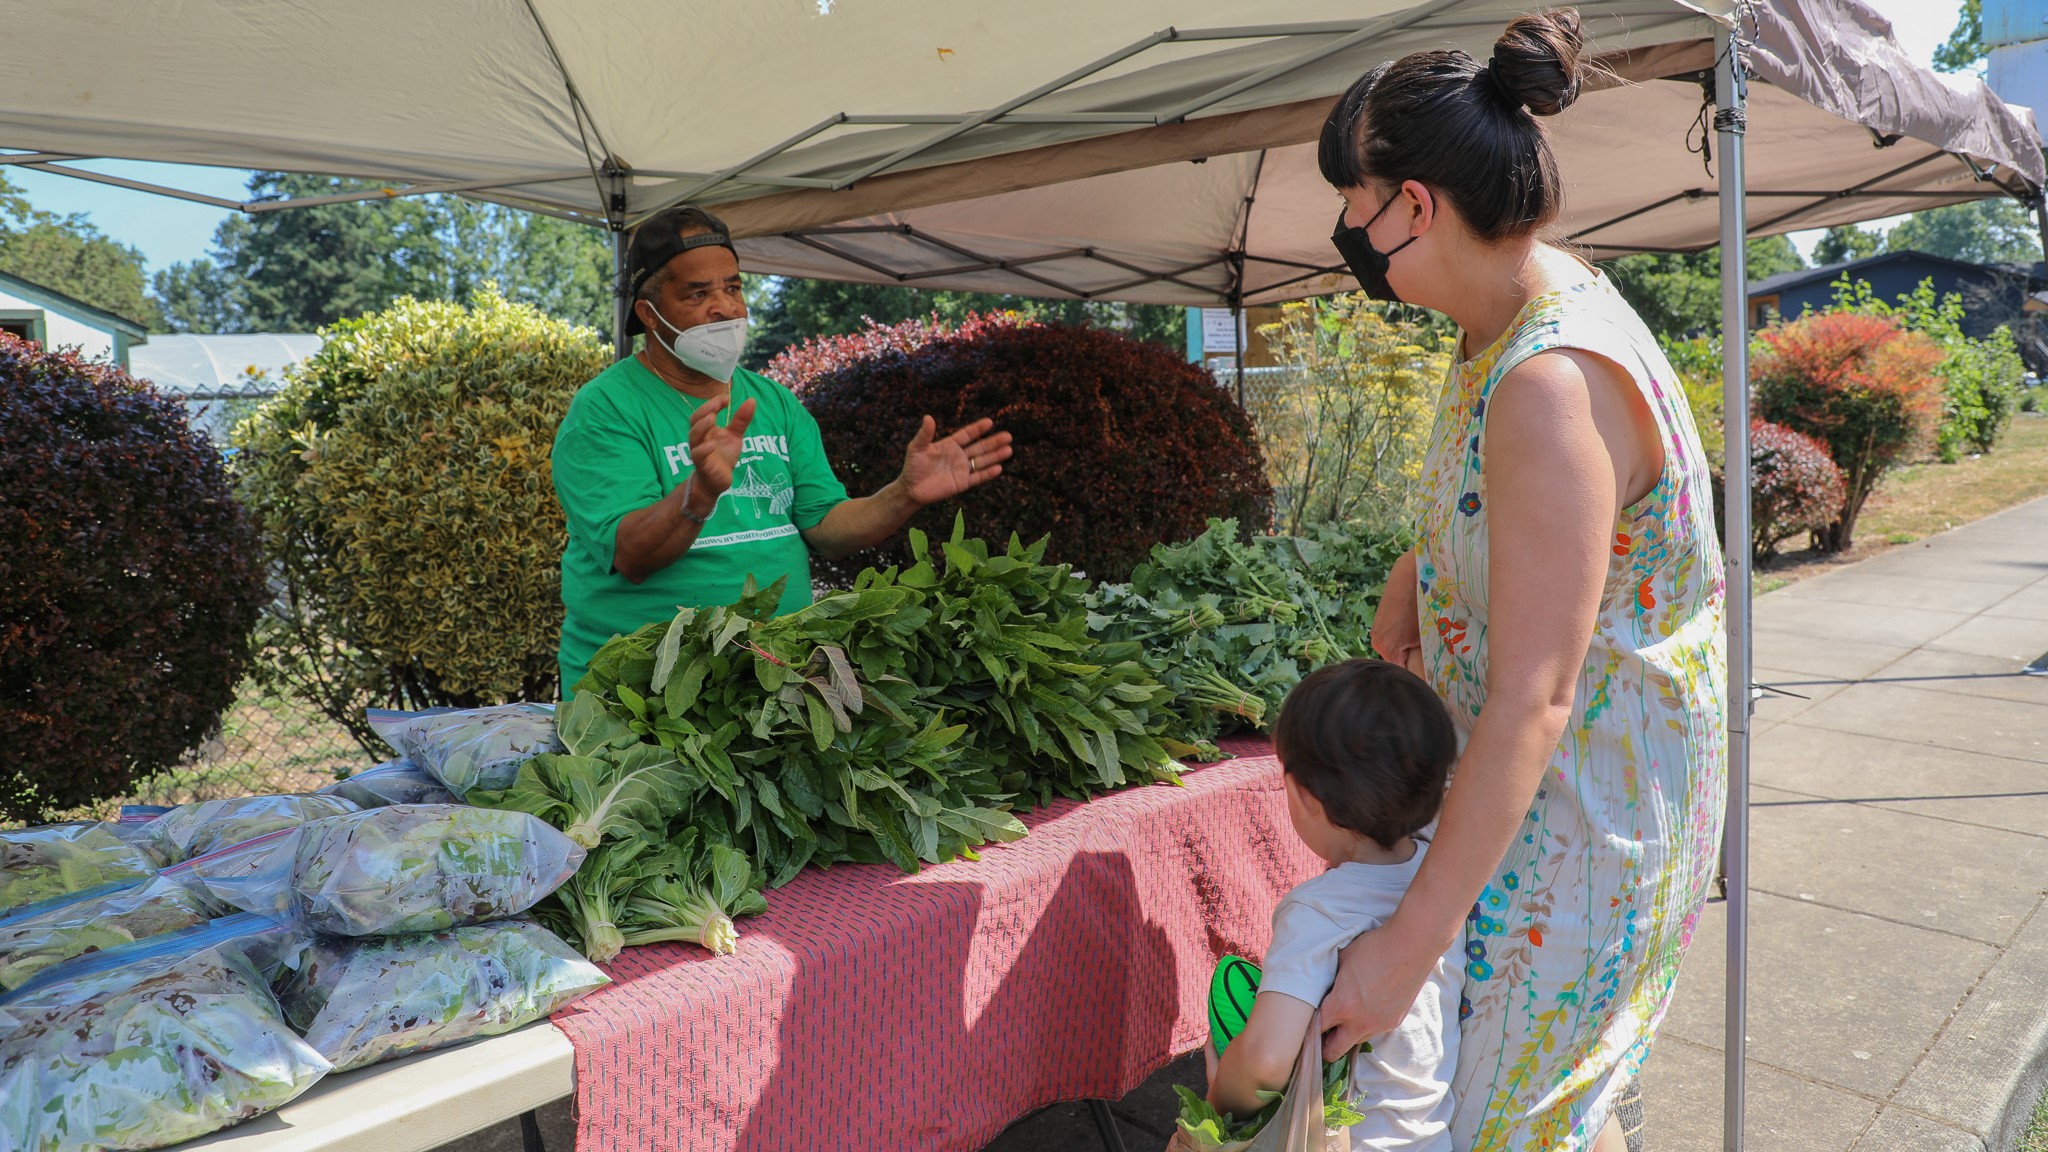 Photo of Our Village Gardens volunteer standing behind a table covered in vegetables they are distributing for free to people at an event in the New Columbia community in North Portland. The volunteer has hands extended in front of him while he explains one way to prepare a vegetable to a mother with a young child on the other side of the table.